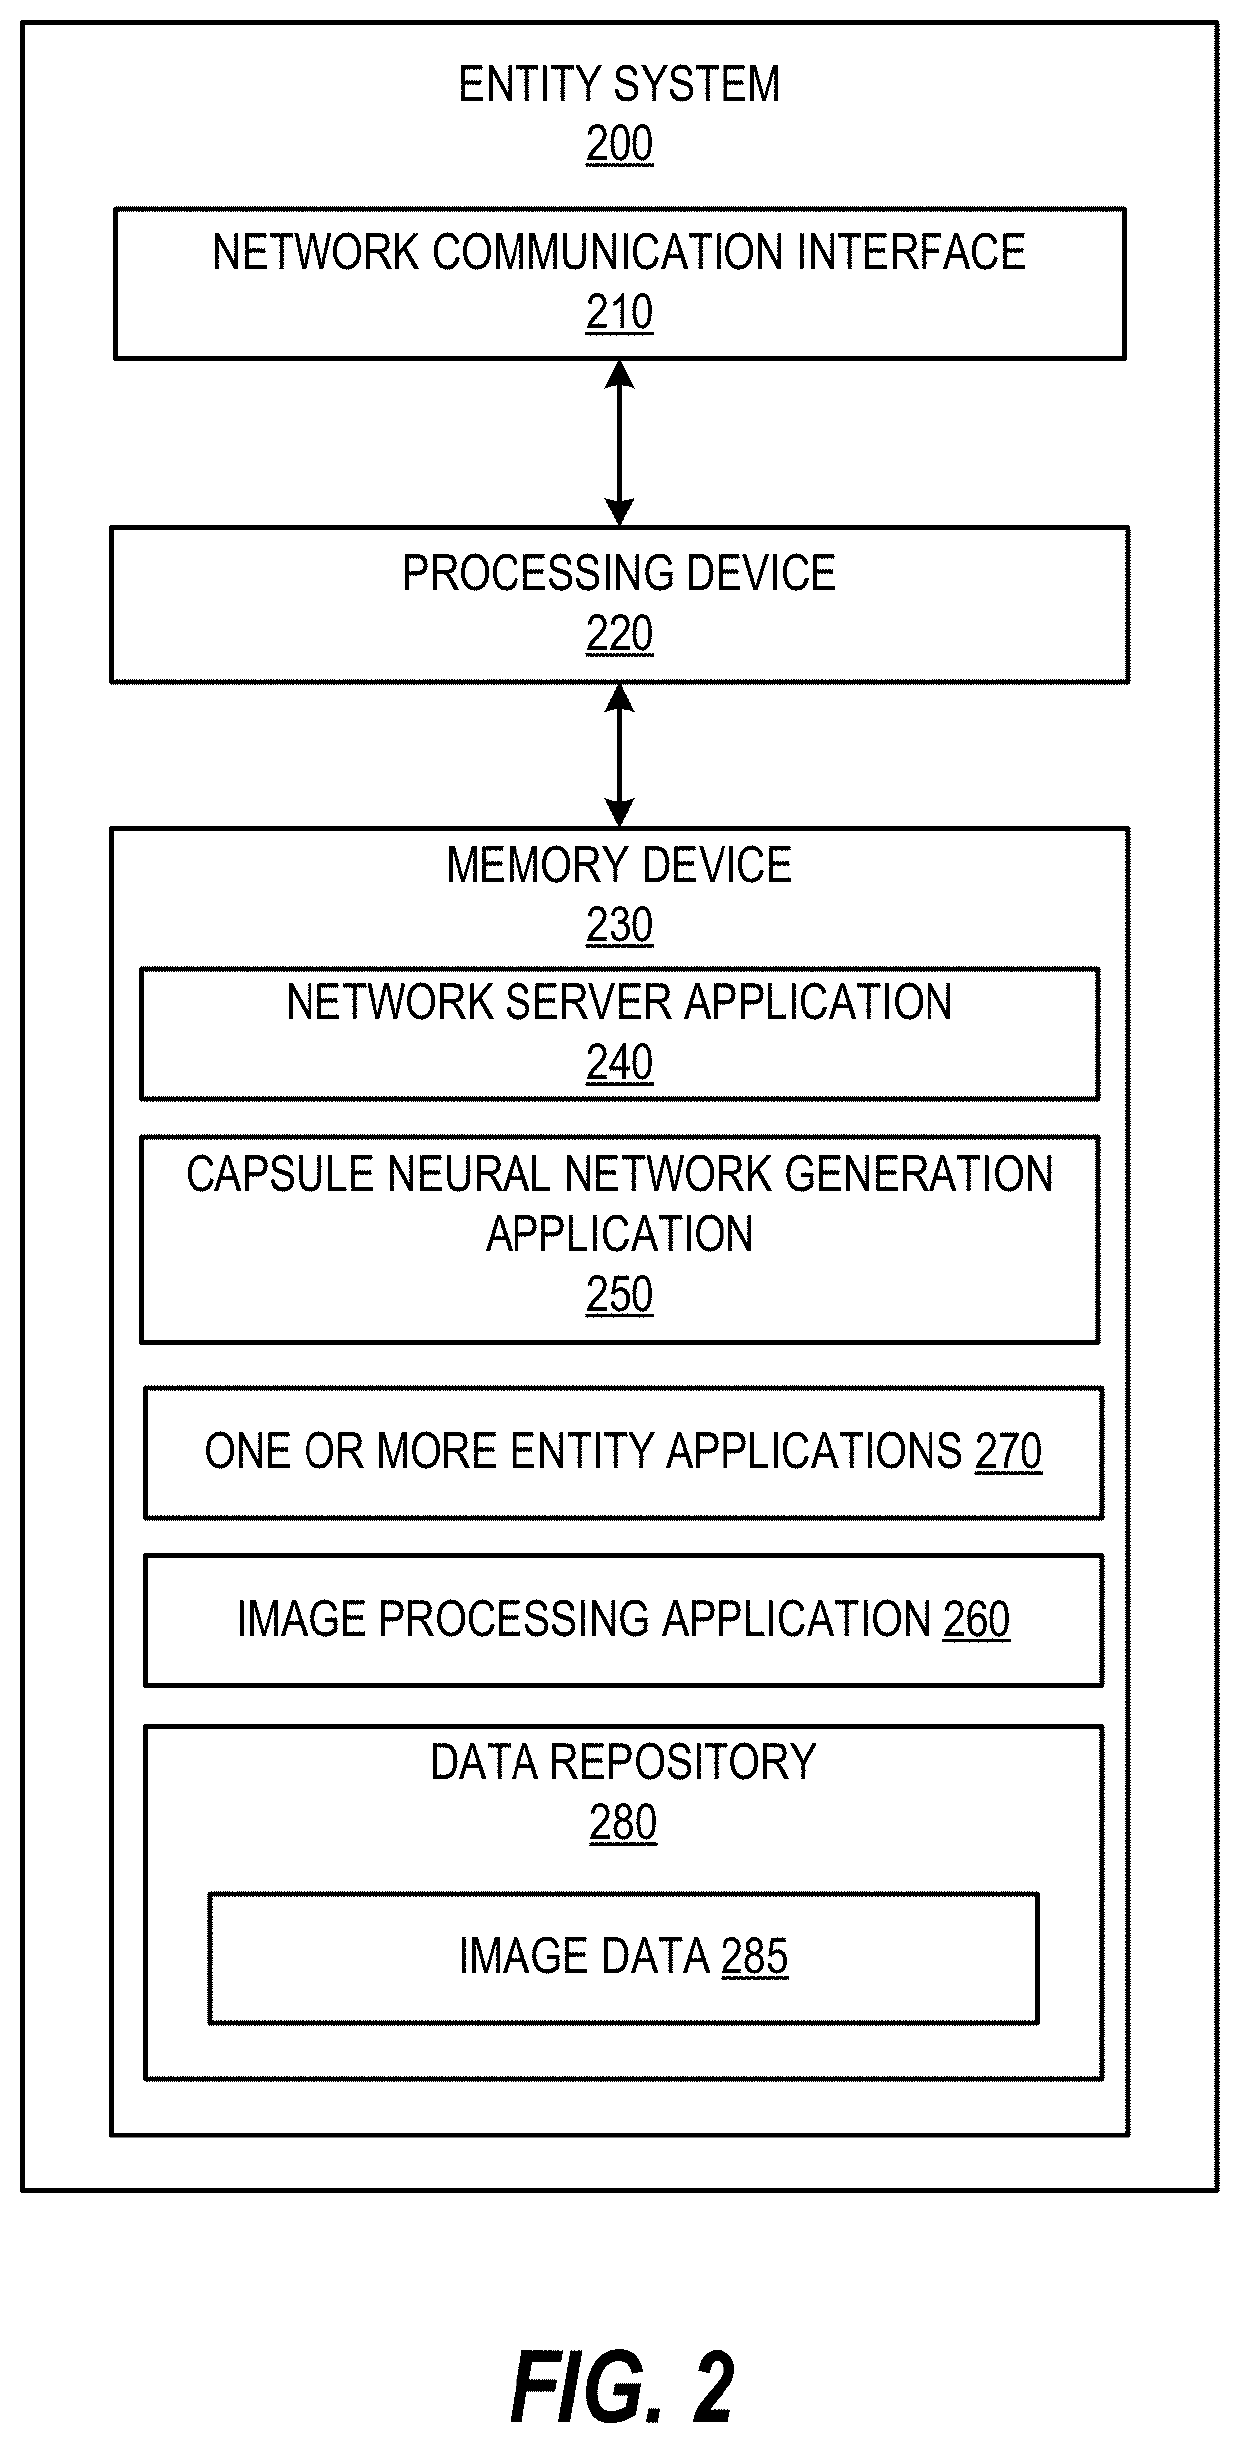 Generation of capsule neural networks for enhancing image processing platforms